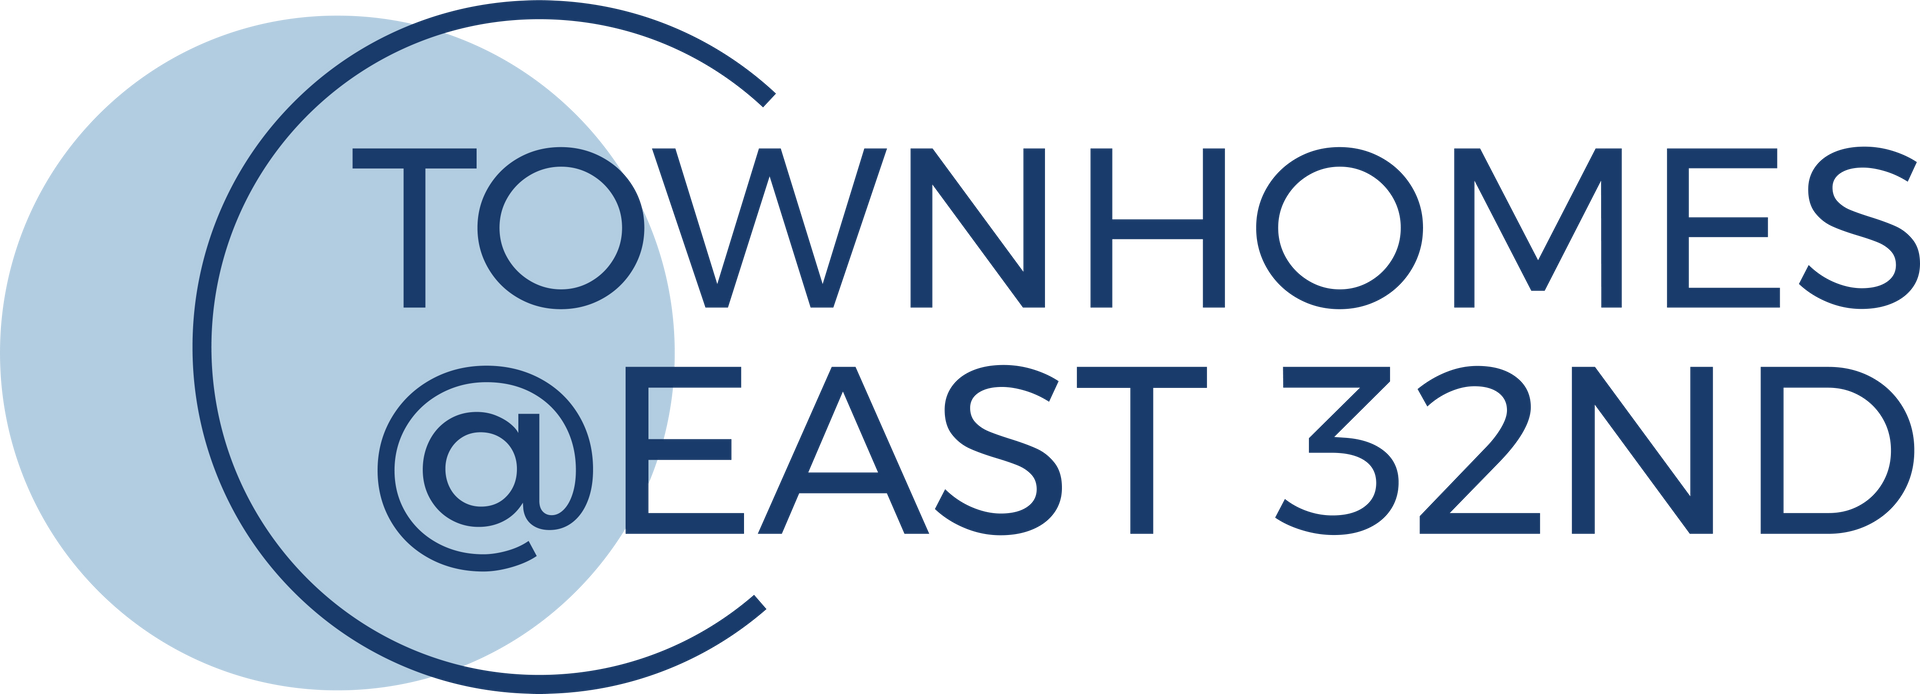 Townhomes @East 32nd Logo - Header